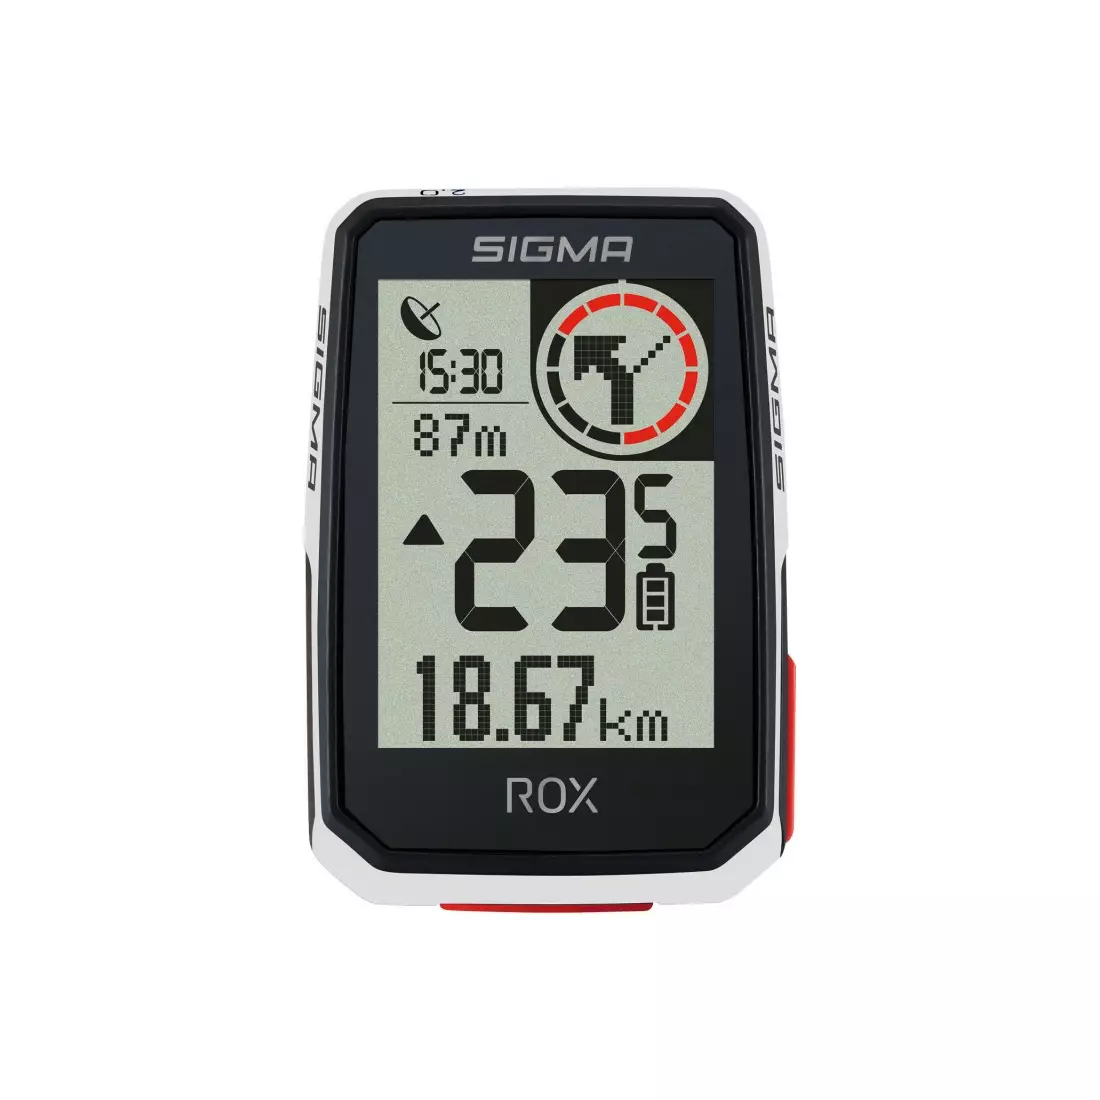 Sigma bicycle counter ROX 2.0, White, X1051